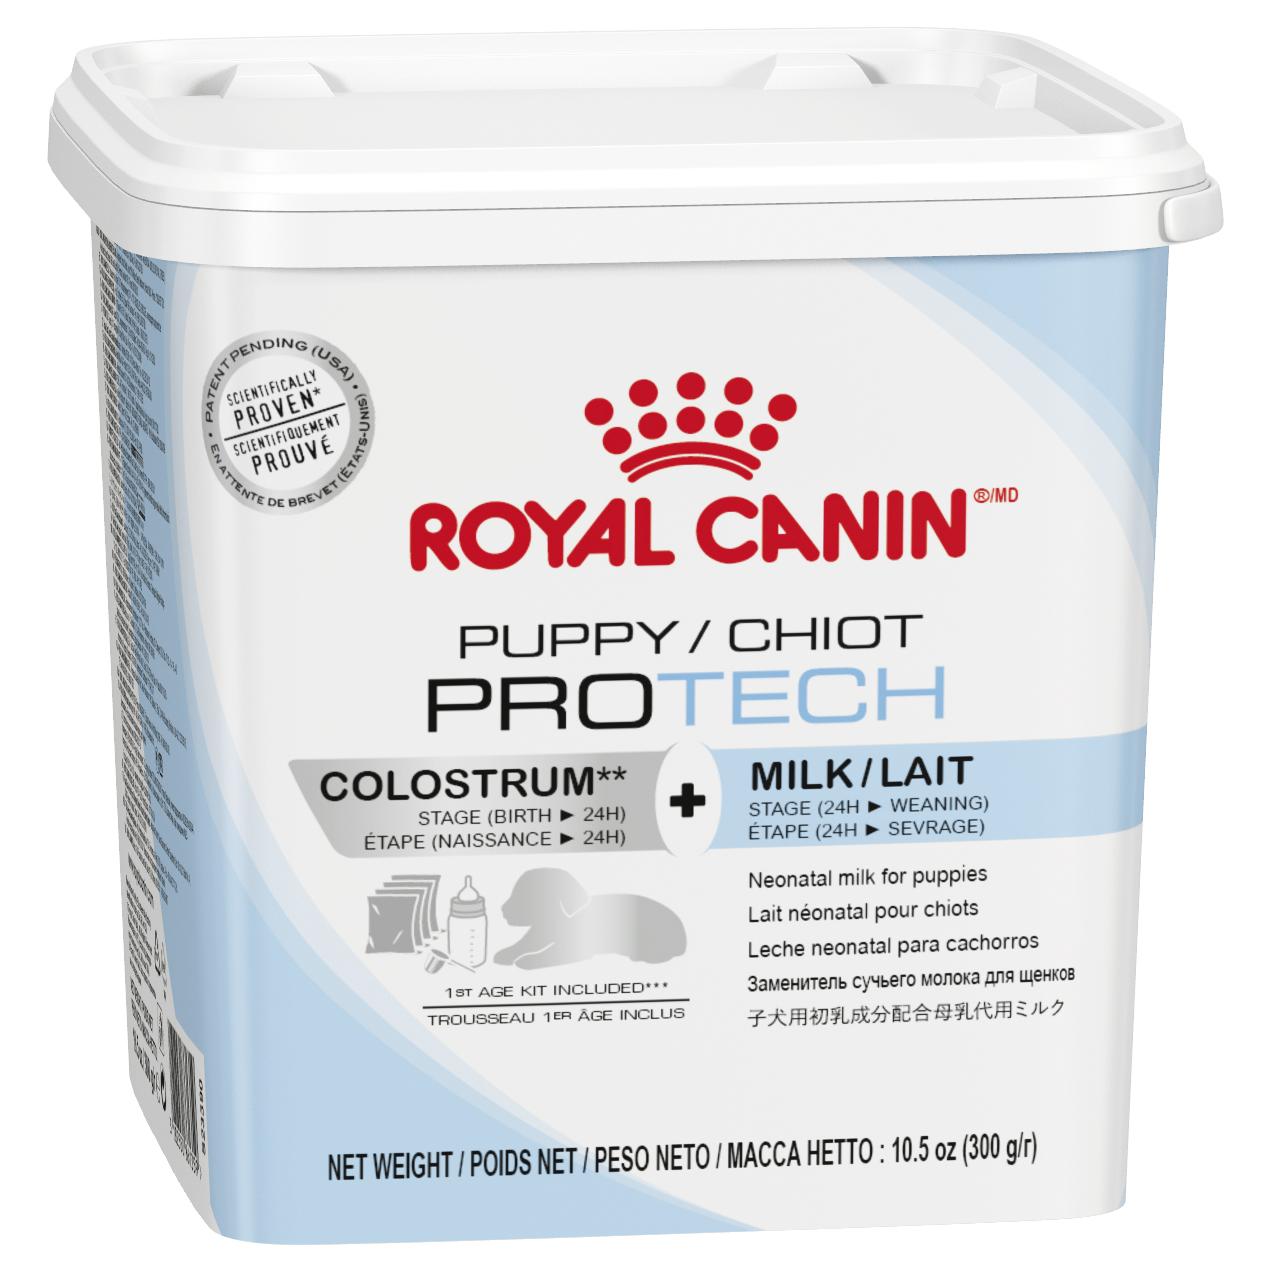 Royal Canin Puppy ProTech Milk Replacement